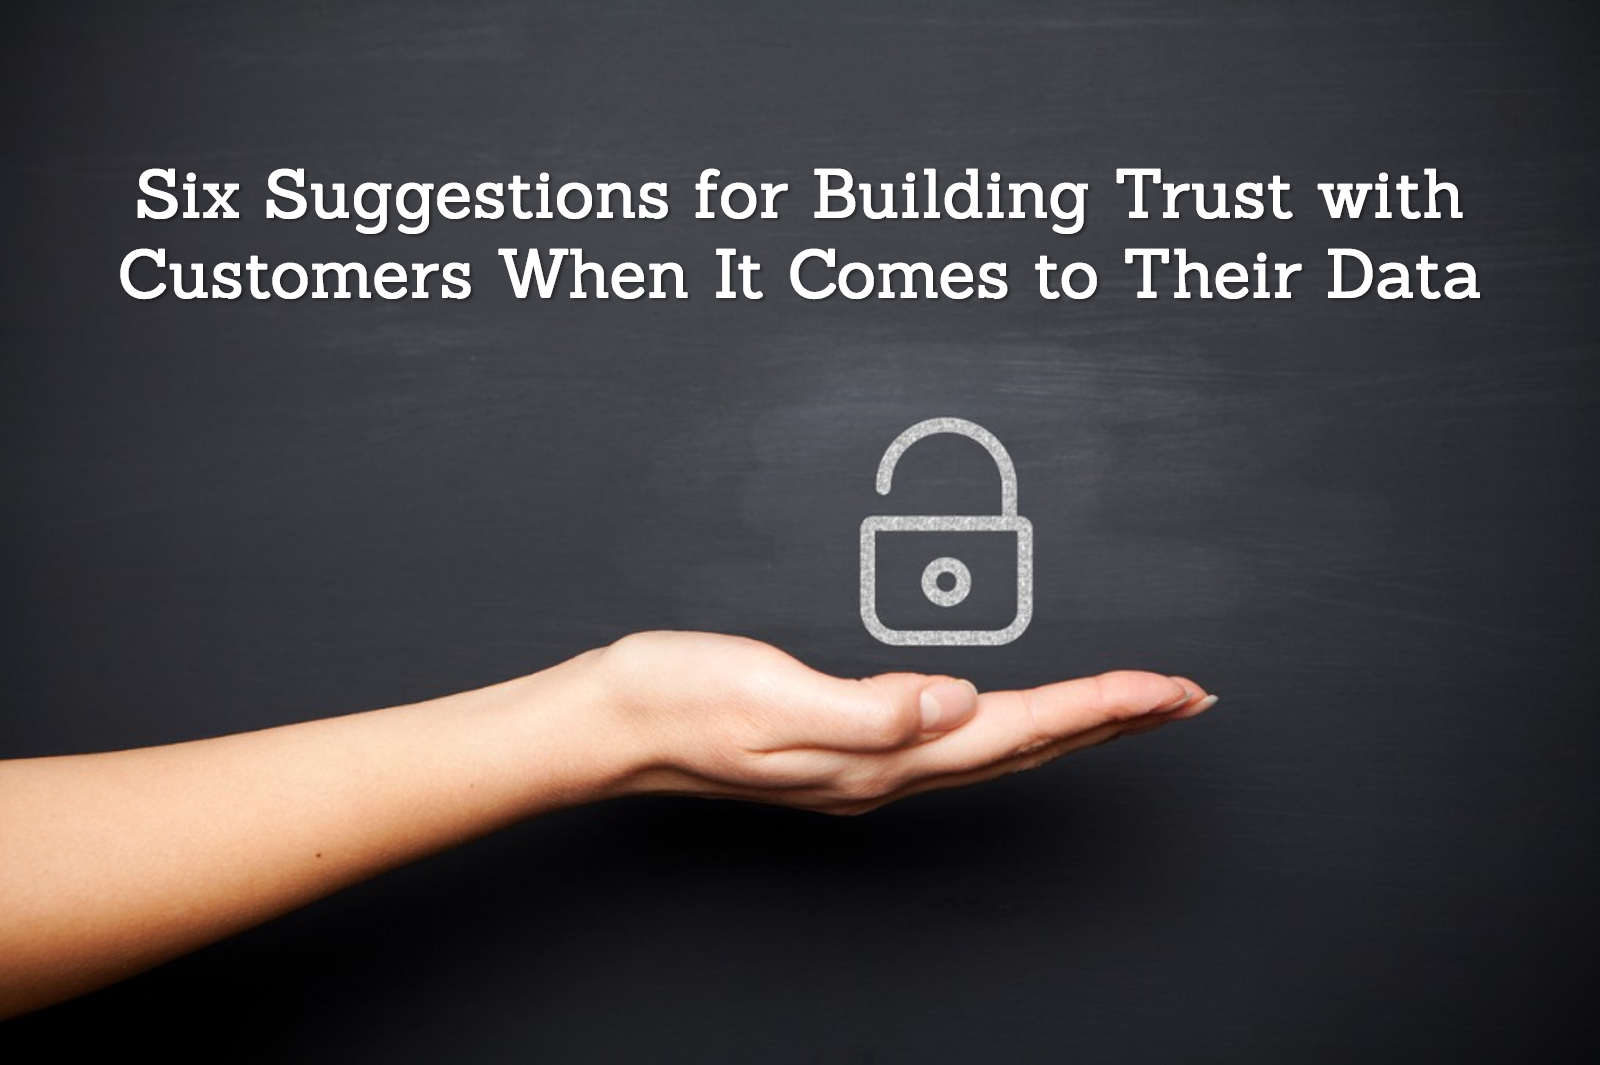 Six Suggestions for Building Trust with Customers When It Comes to Their Data